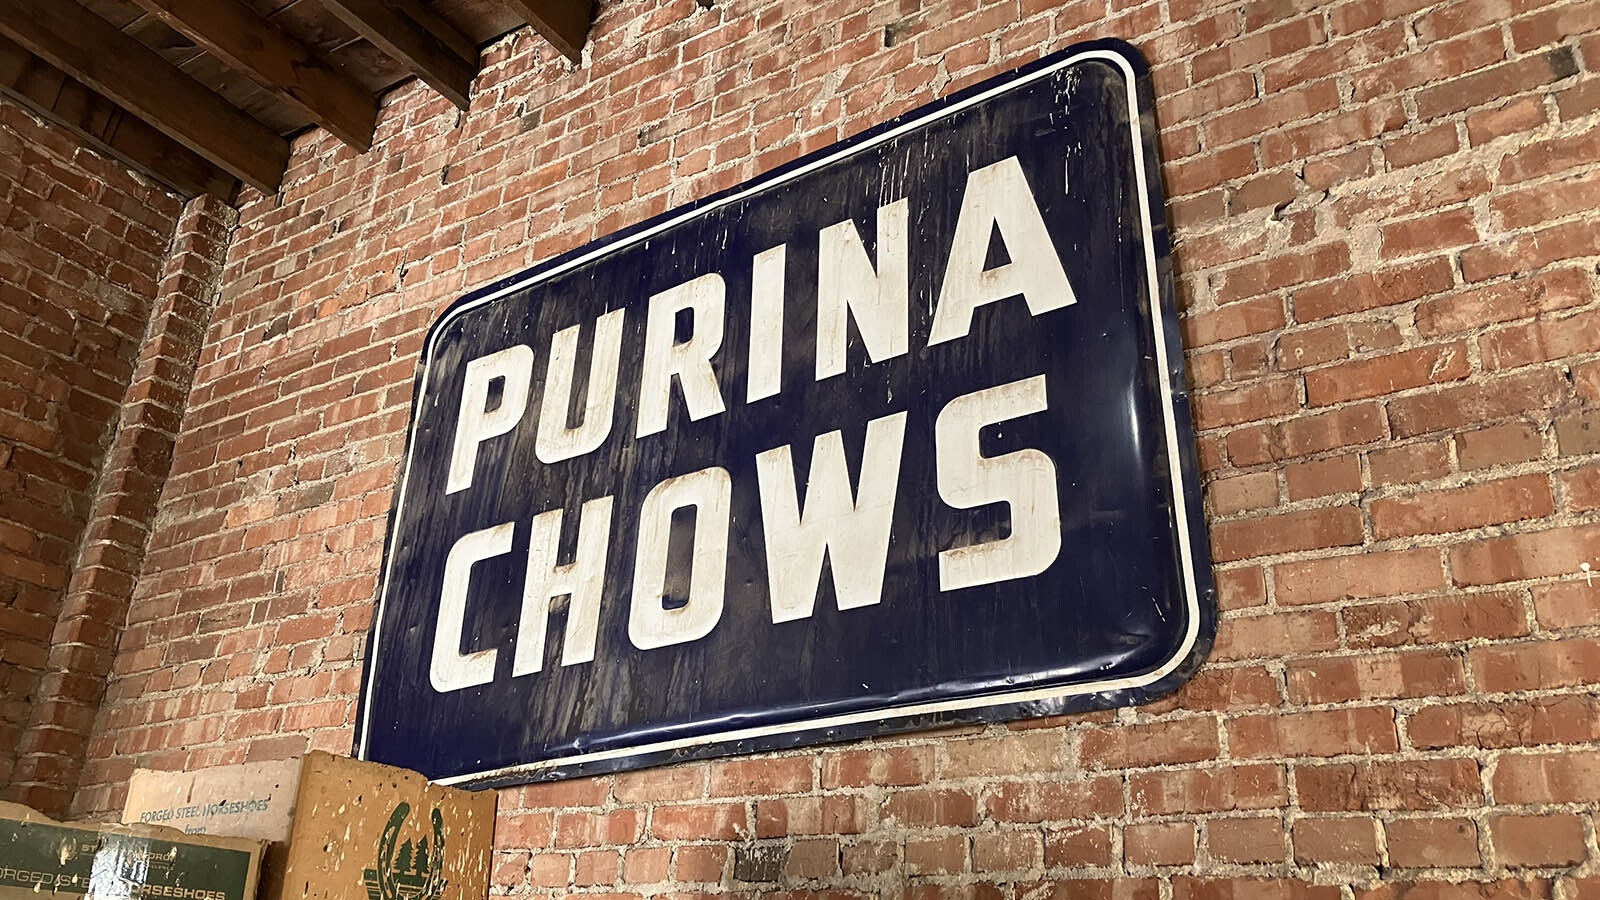 An old Purina Chows sign on the wall in the warehouse.